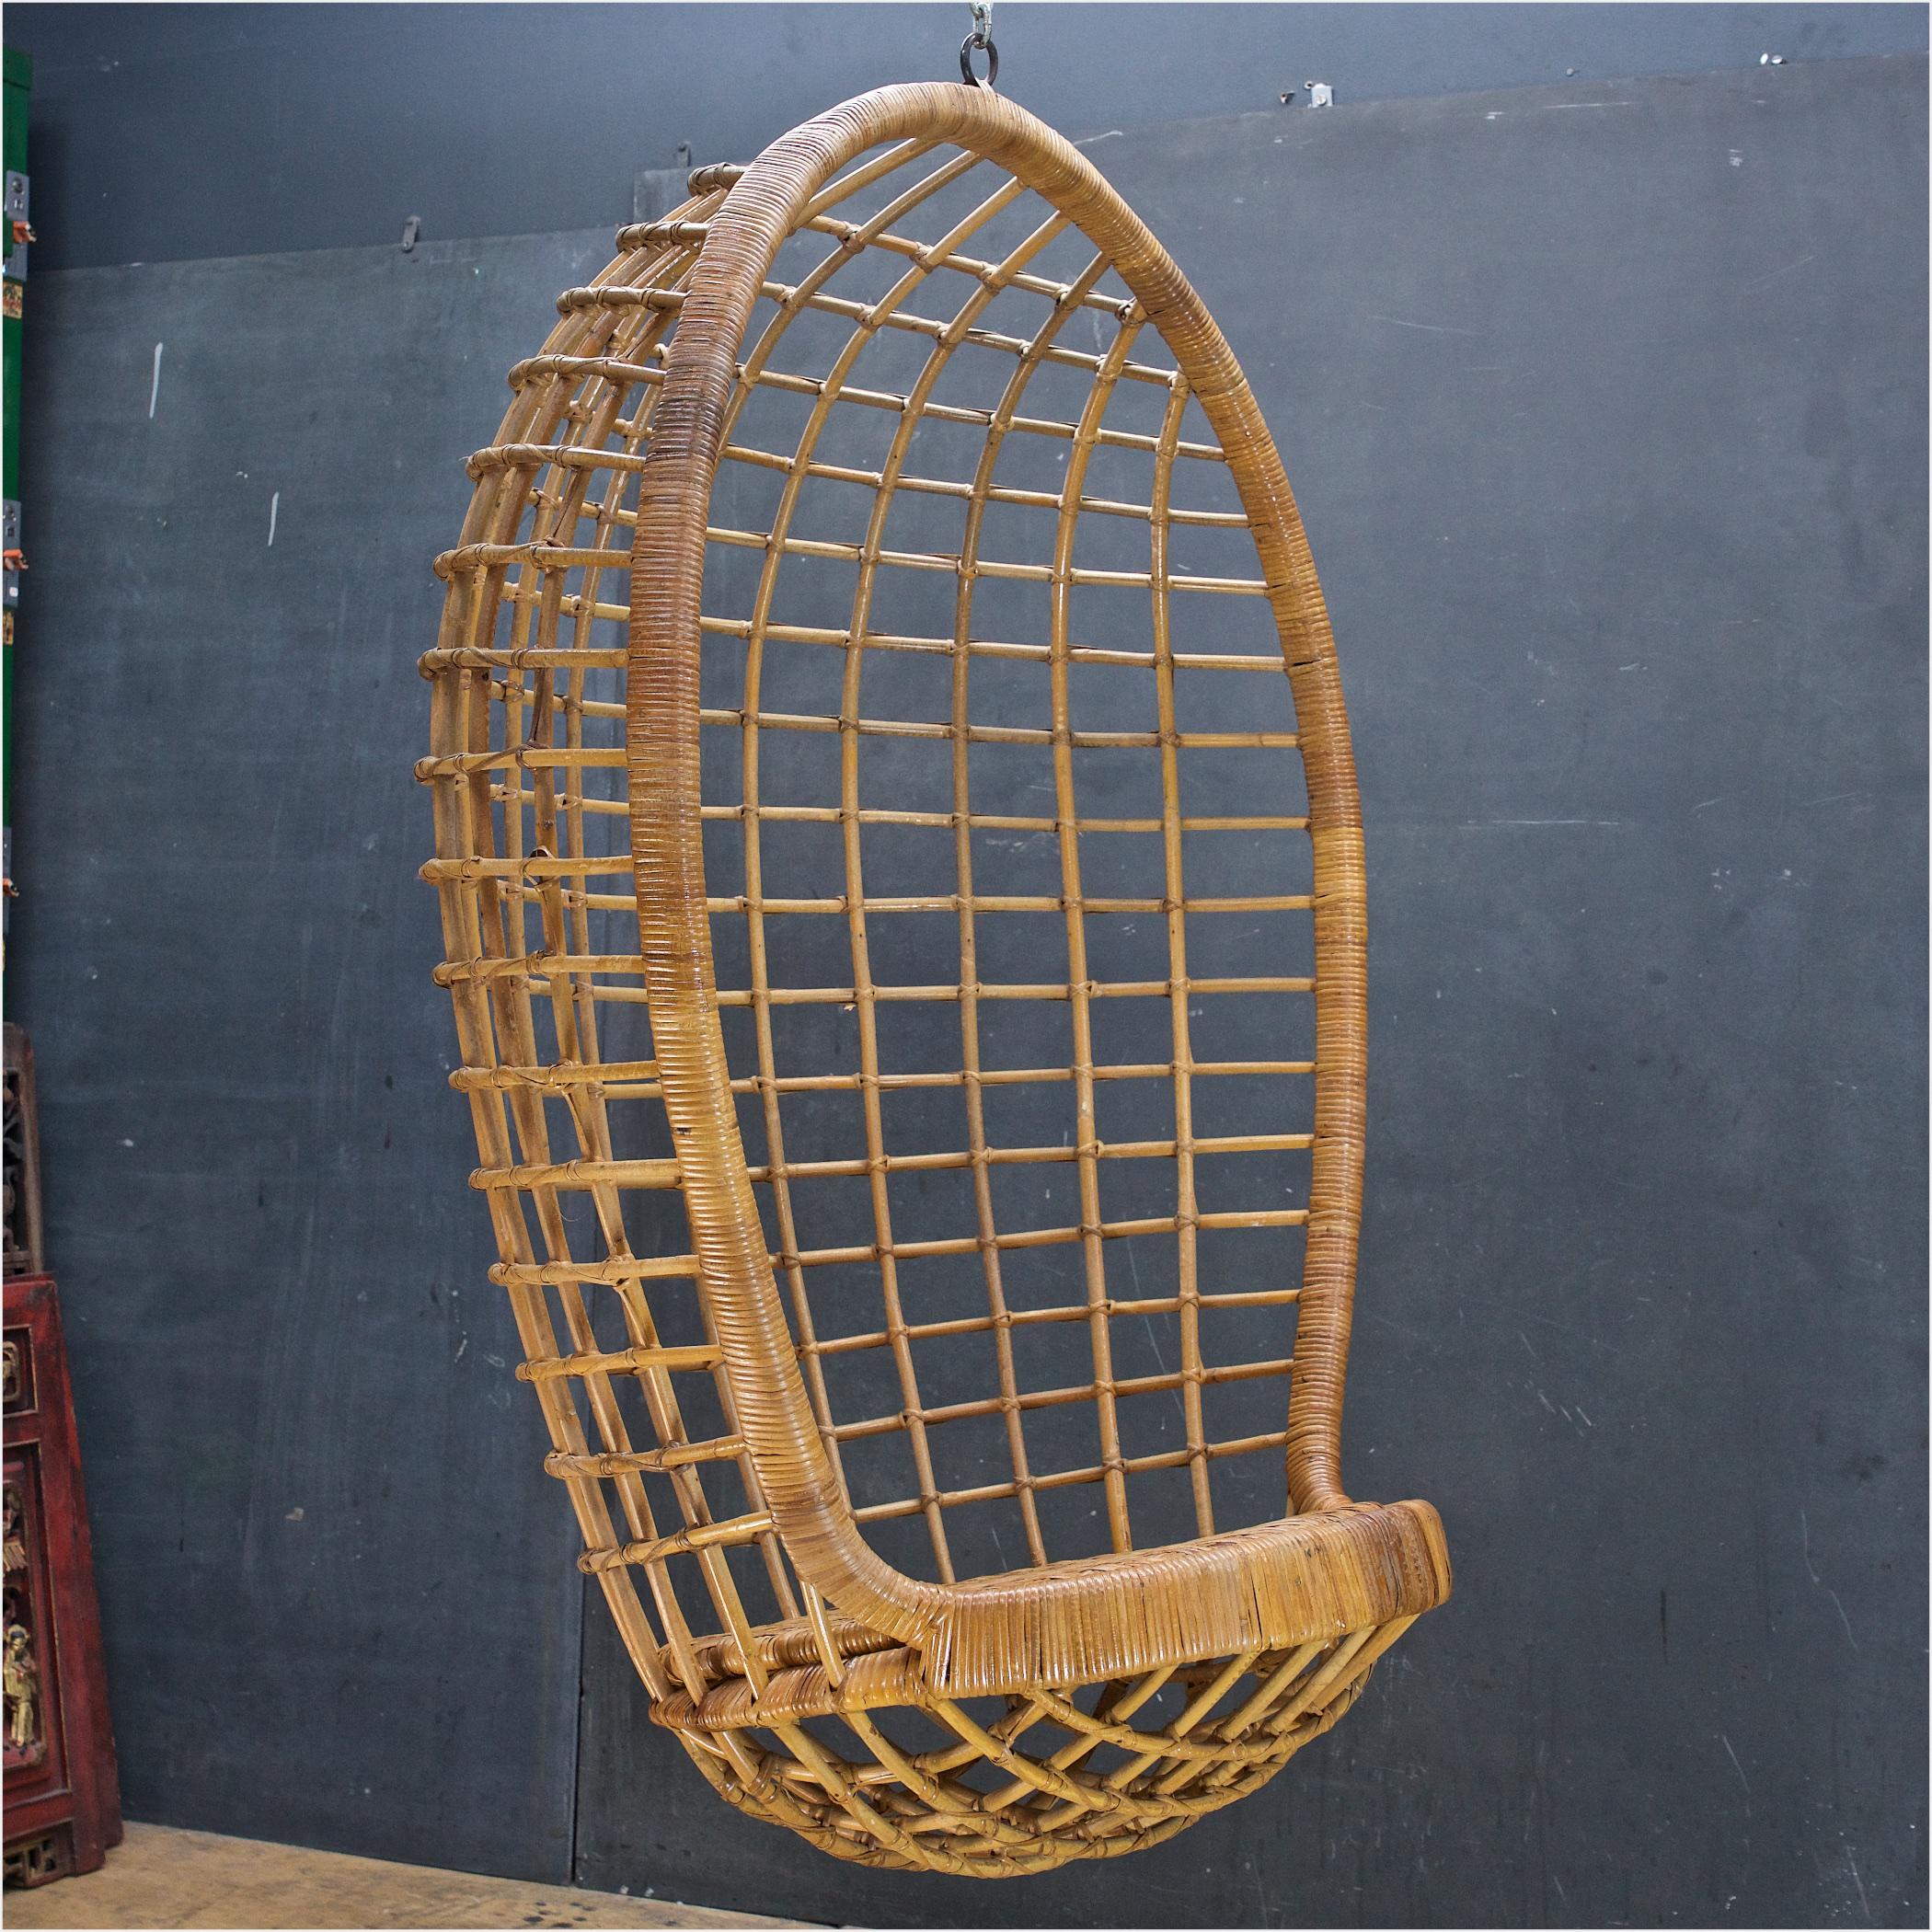 1970s Californian Design Rare Rattan Swinging Chair by Danny Ho Fong for Tropi-Cal.

A rare survivor, incredibly sculptural. It held my weight (160,) I gave it a test run. Quite comfortable. It is old wicker, so the more you plan on using it the